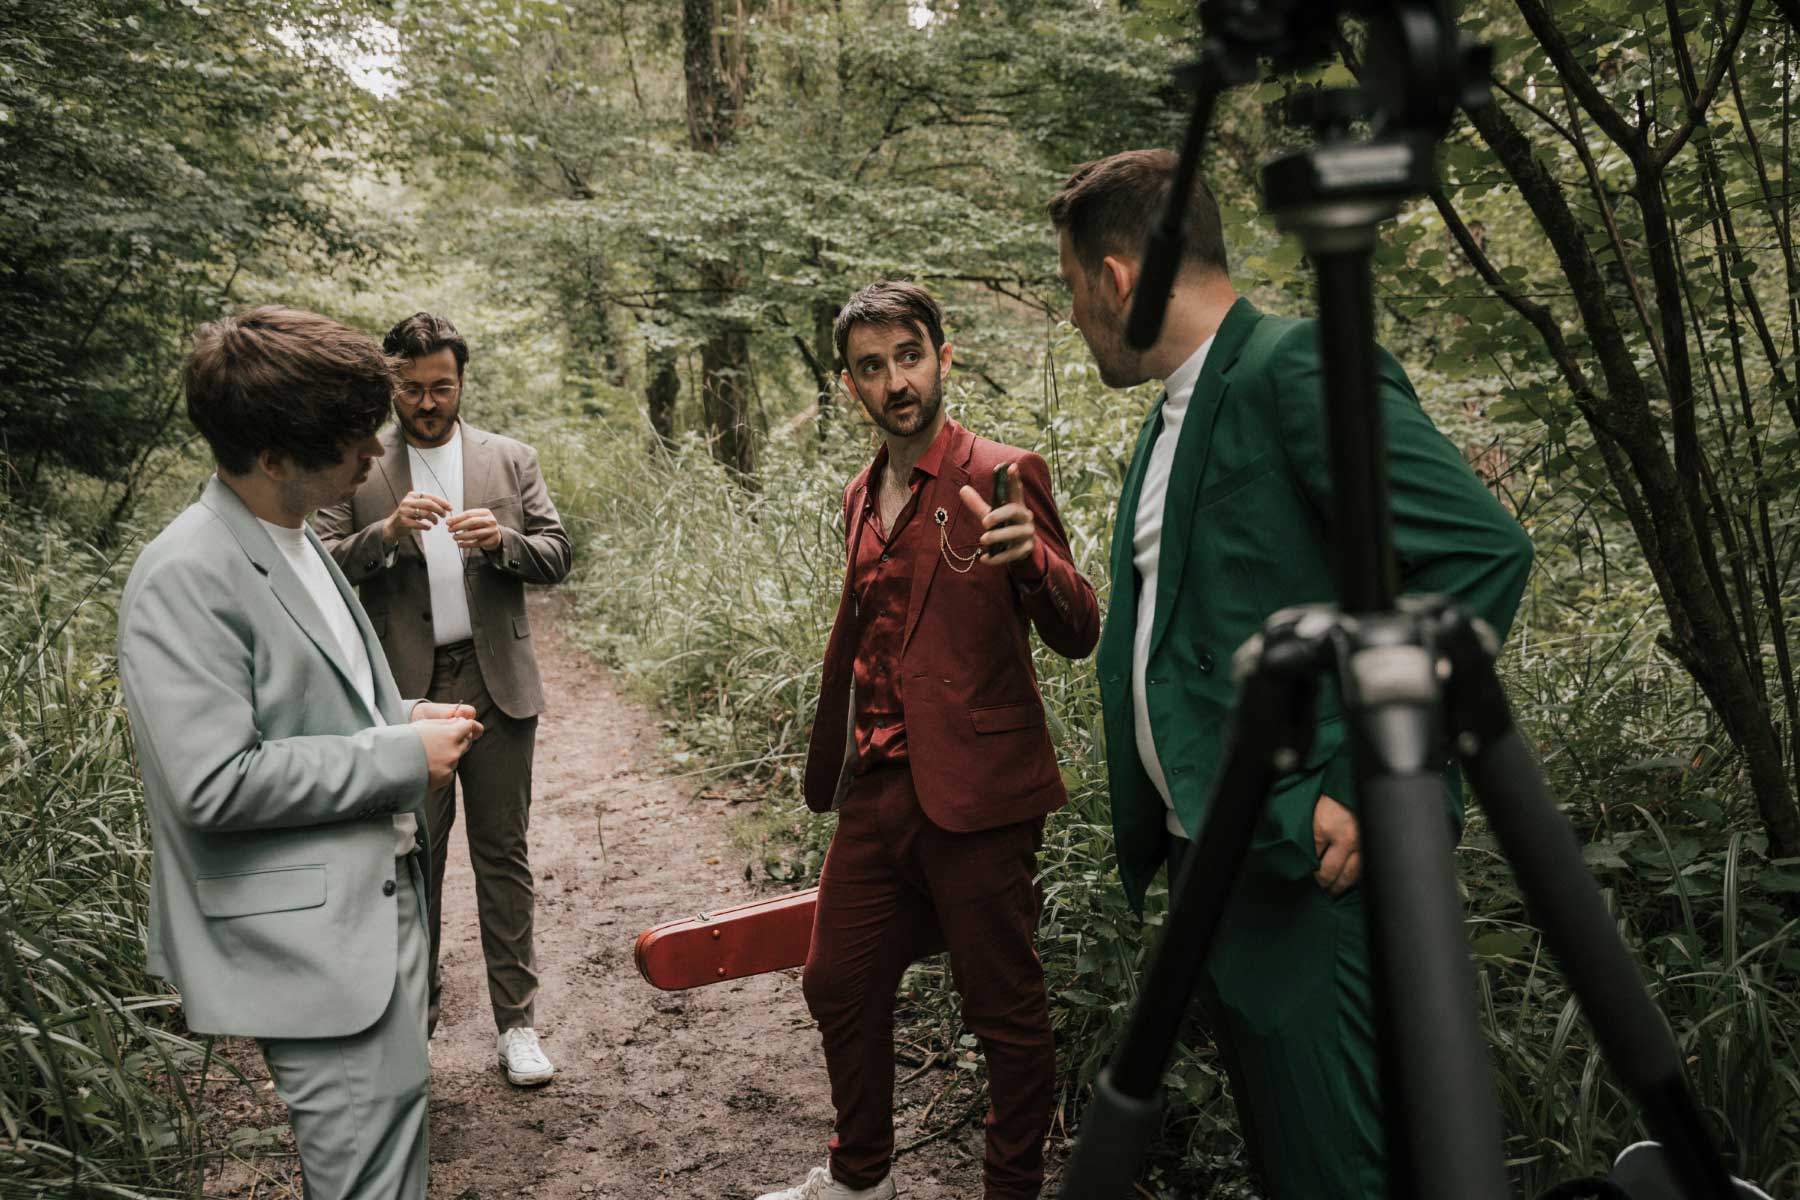 Candid shot of band in forest being directed for a music video